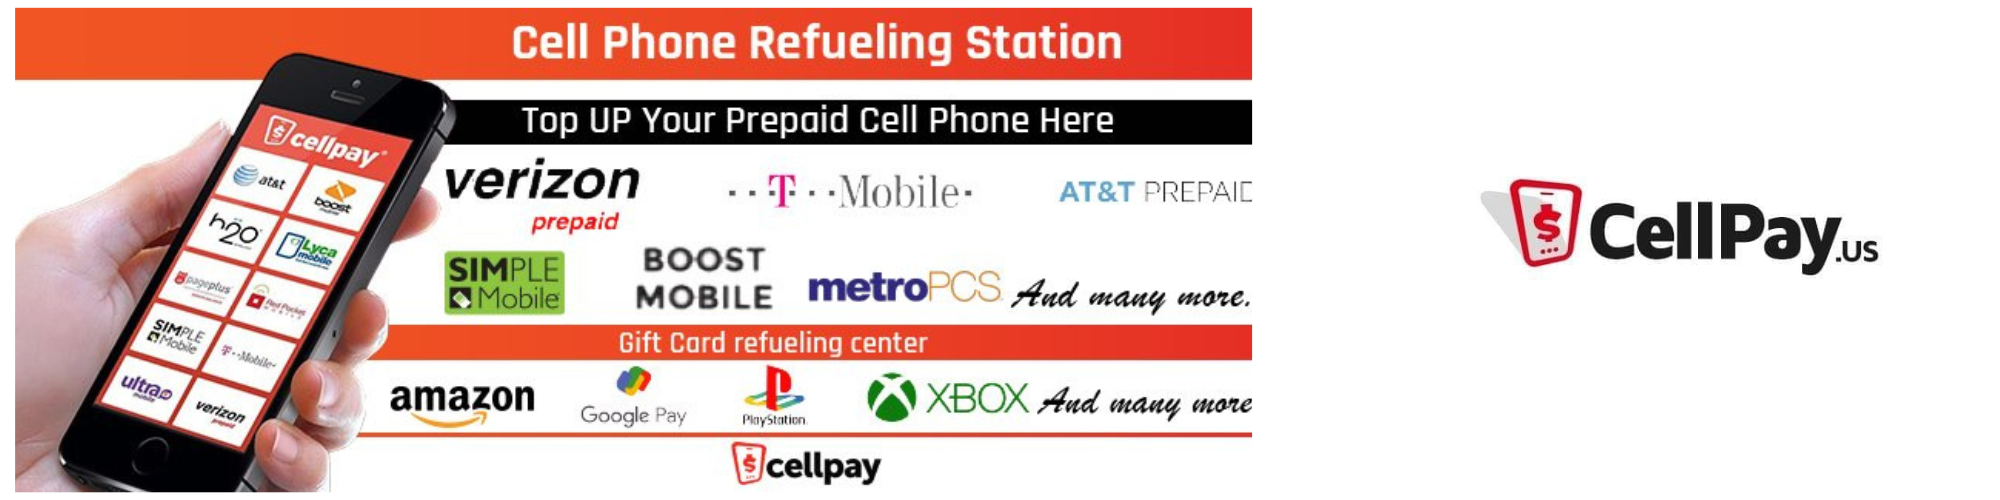 Cellpay.us Reviews cover image